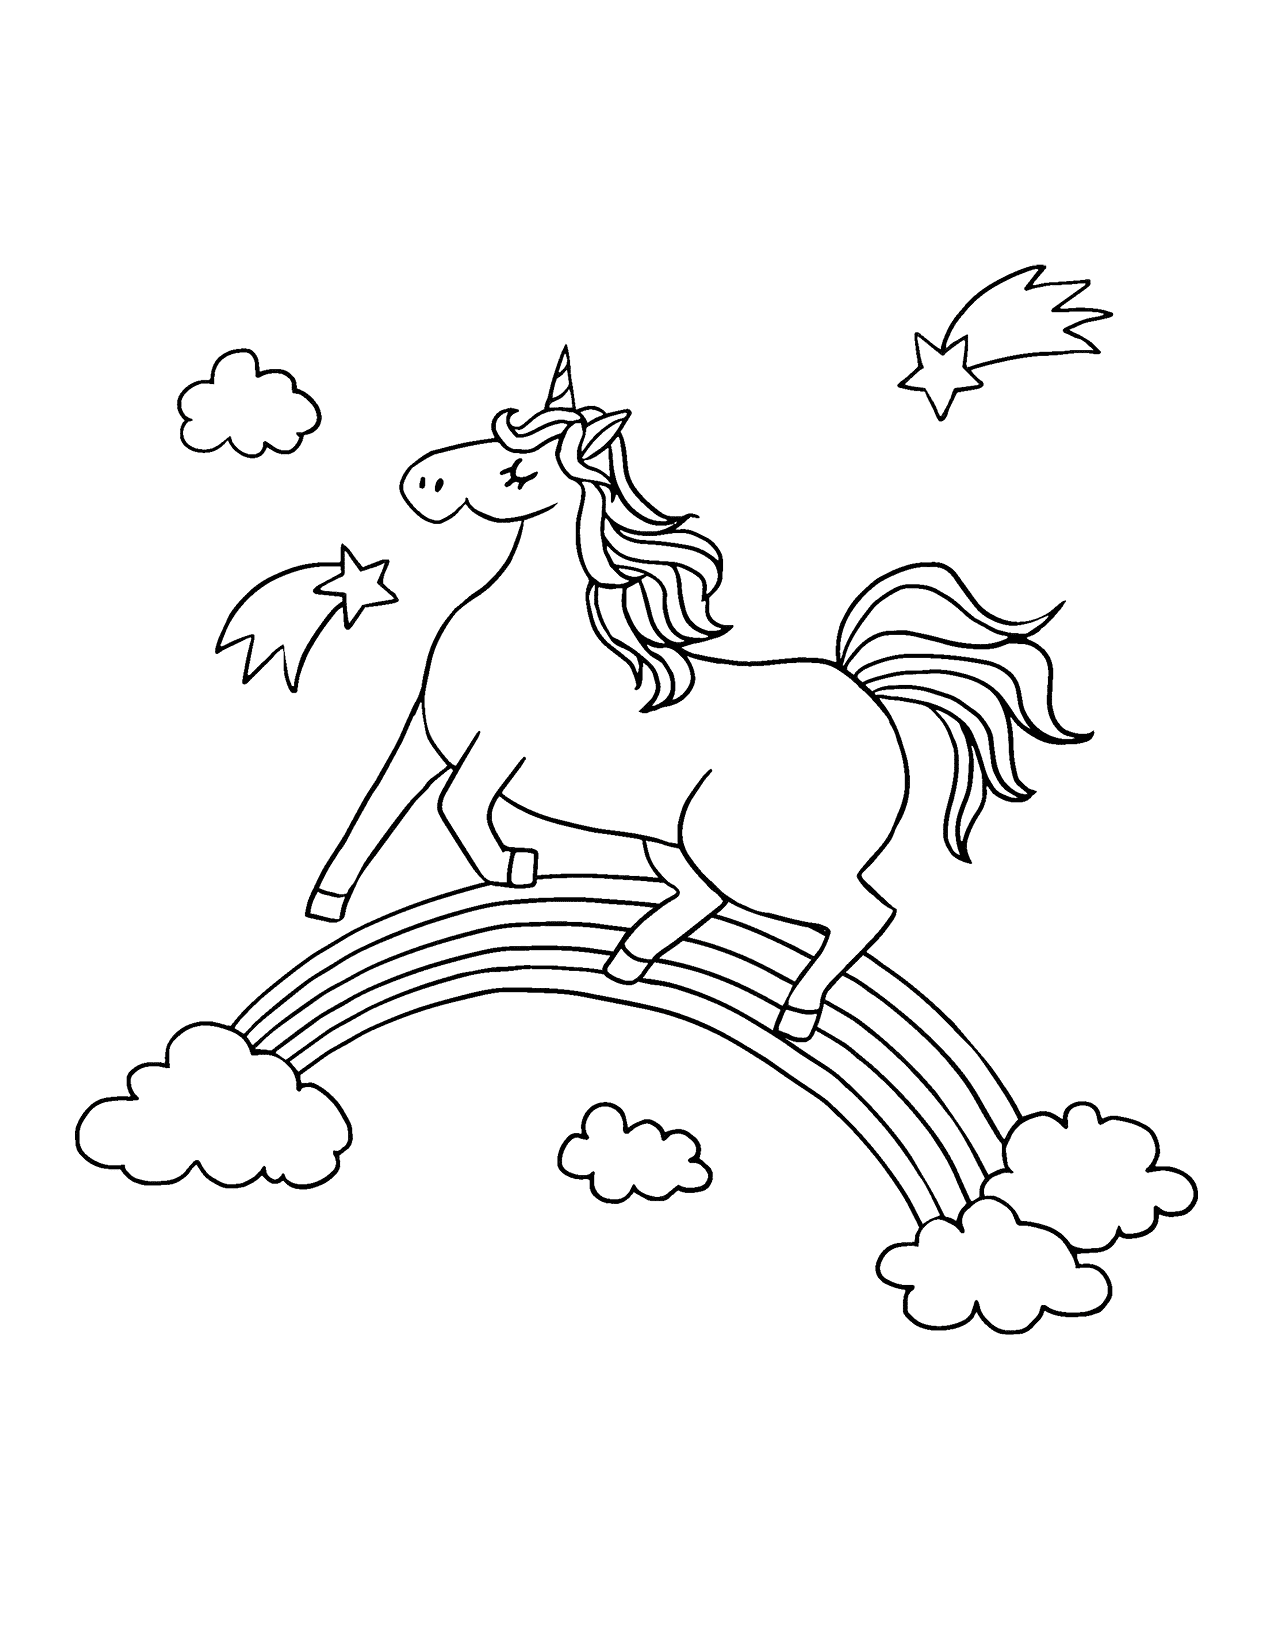 Unicorn and a rainbow in the cloud 